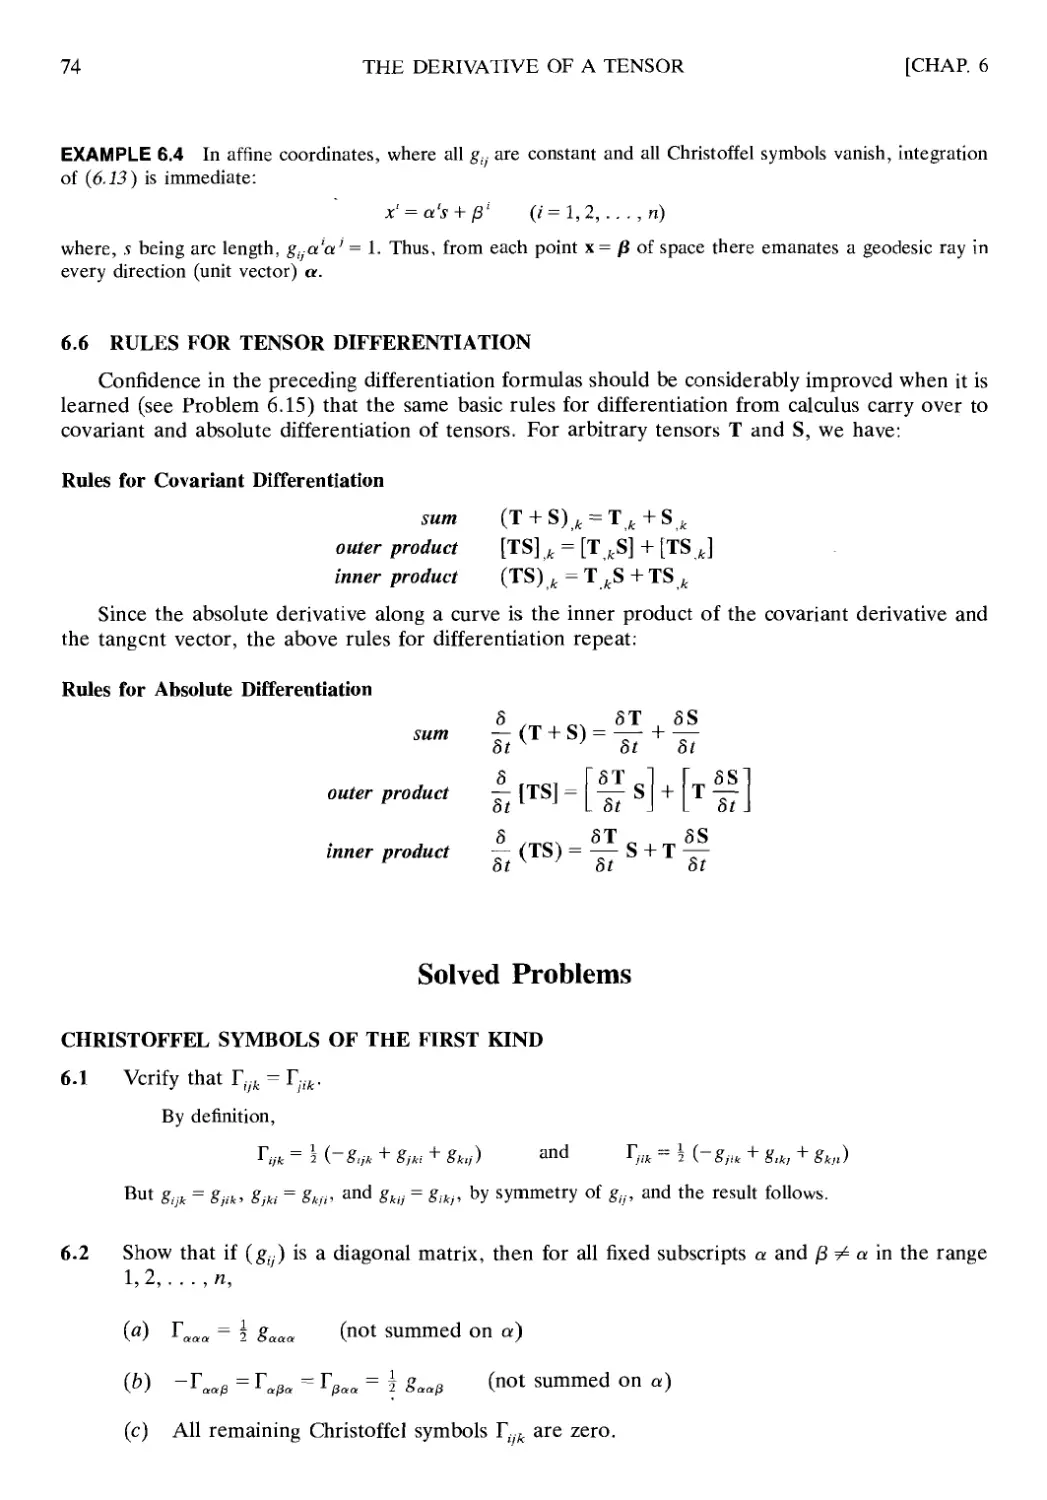 6.6 Rules for Tensor Differentiation